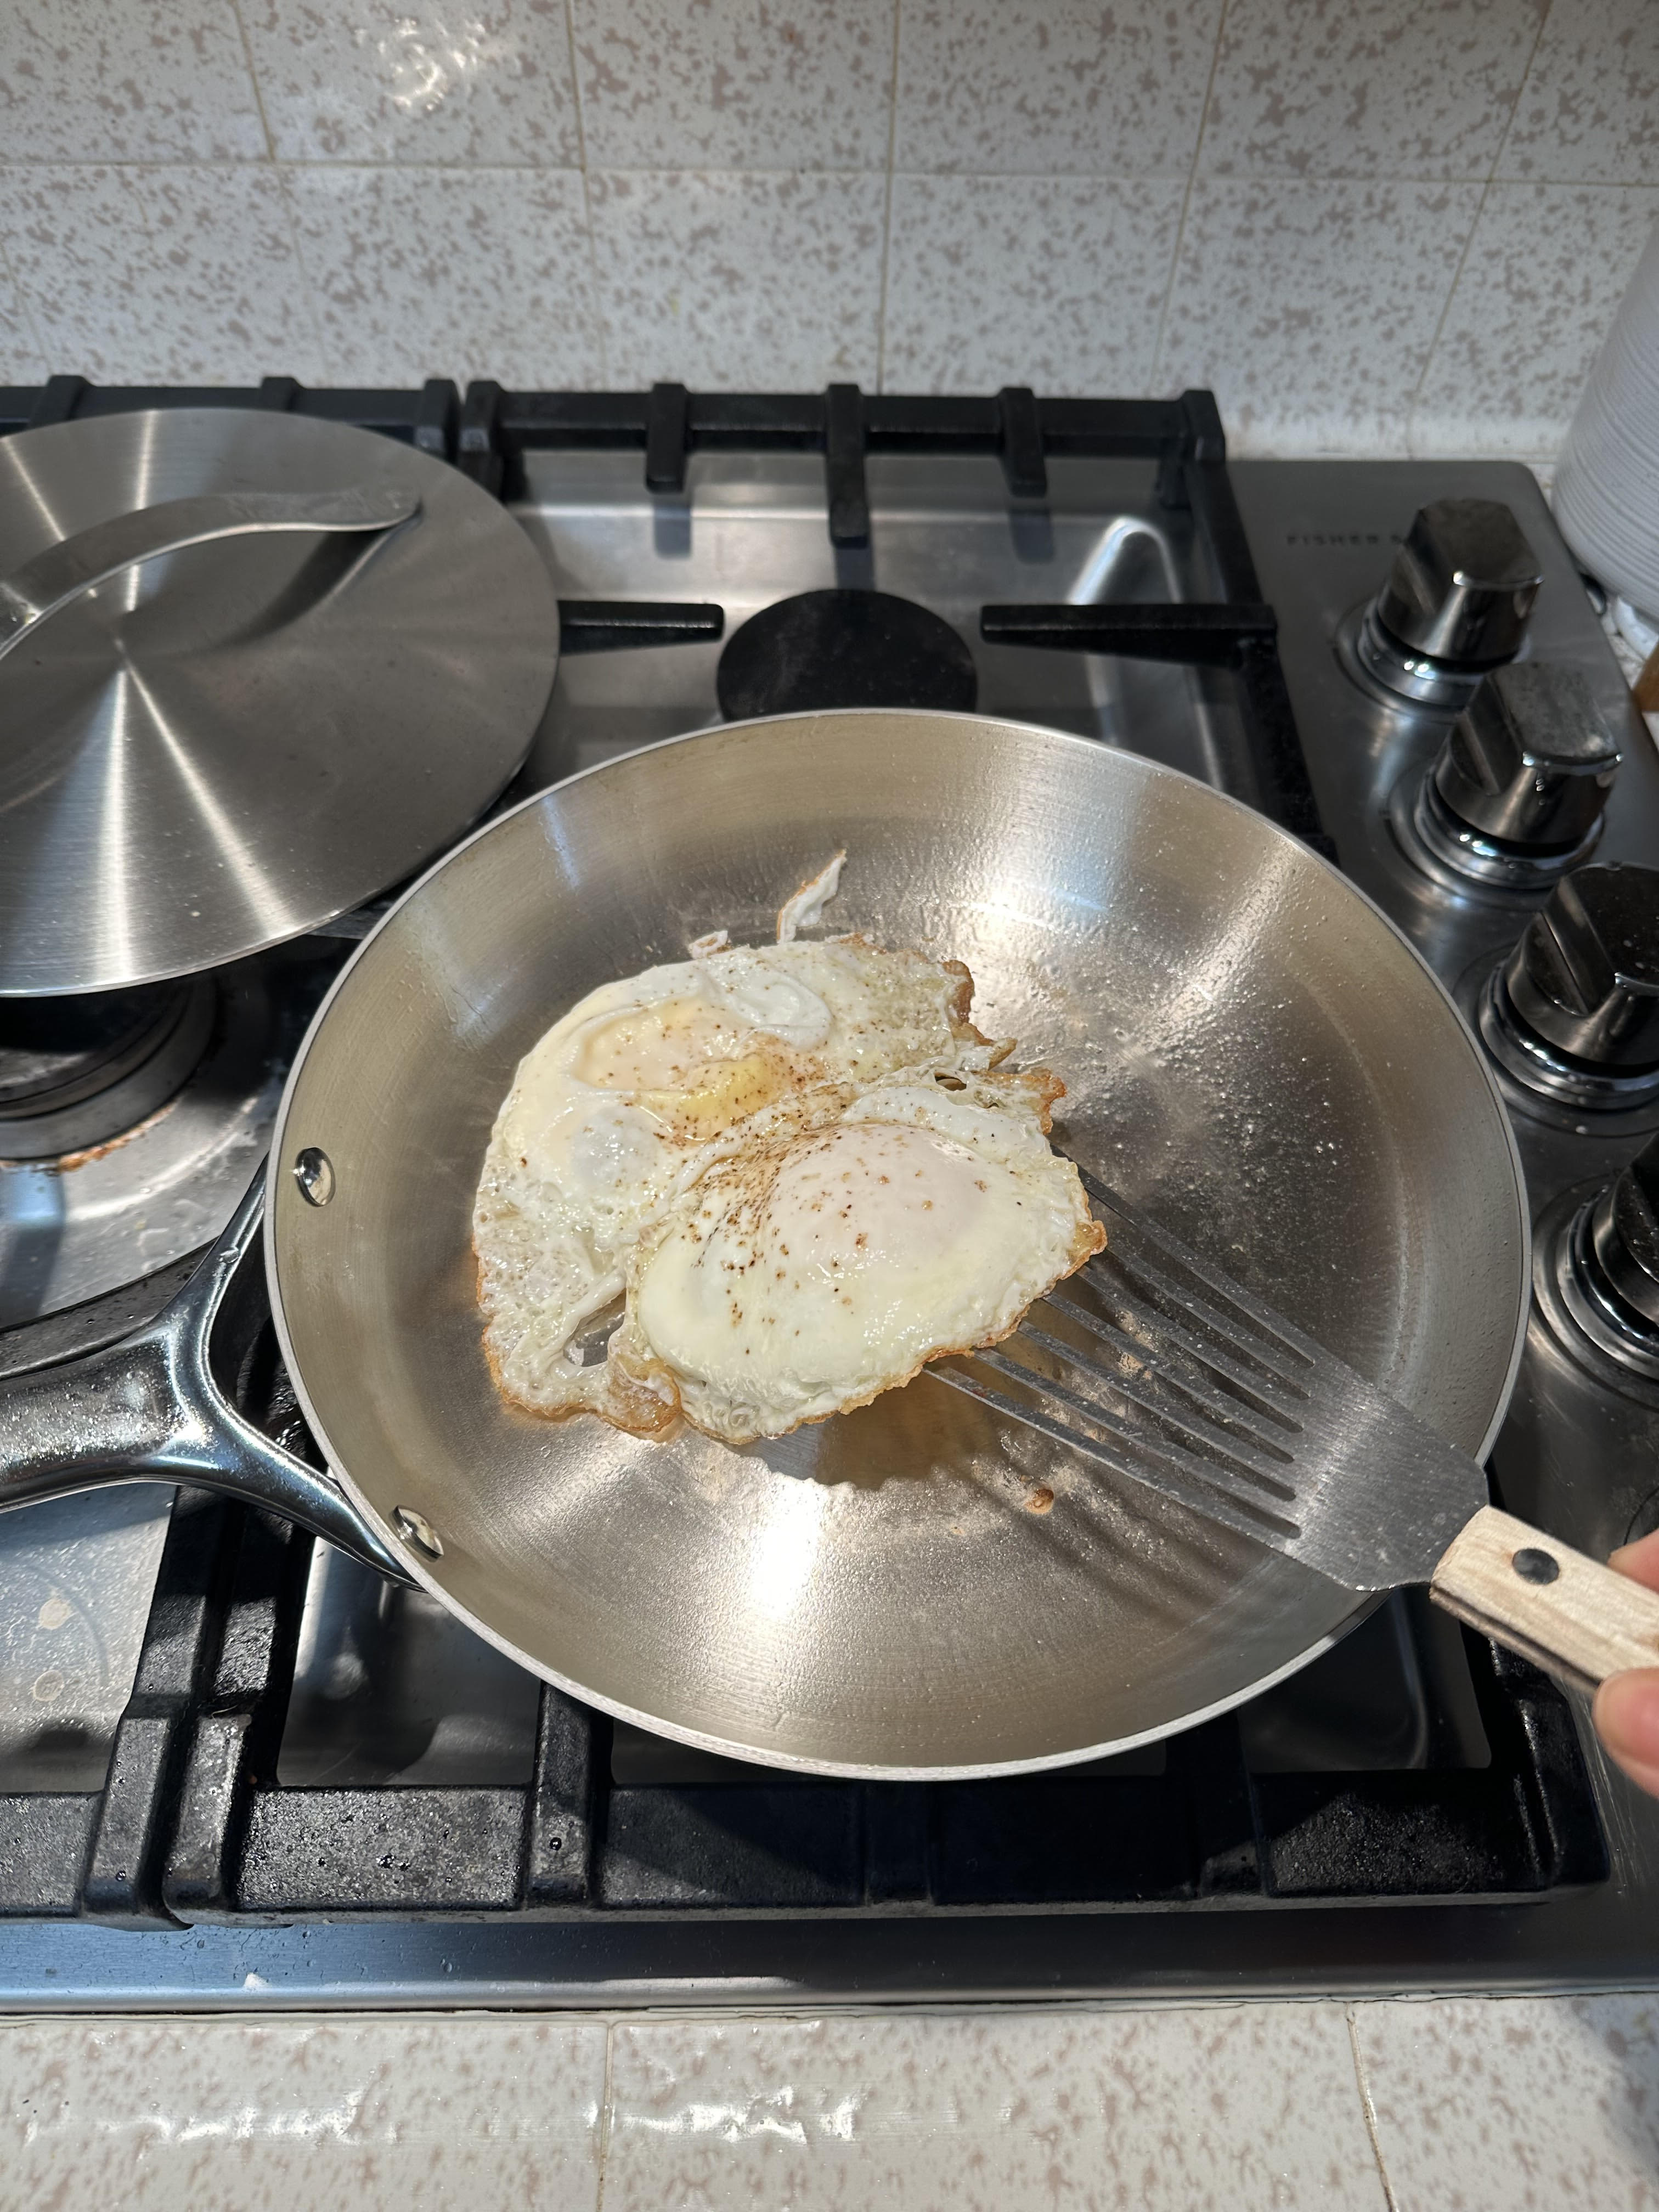 Review: Caraway cookware has a hefty price tag, but it might be